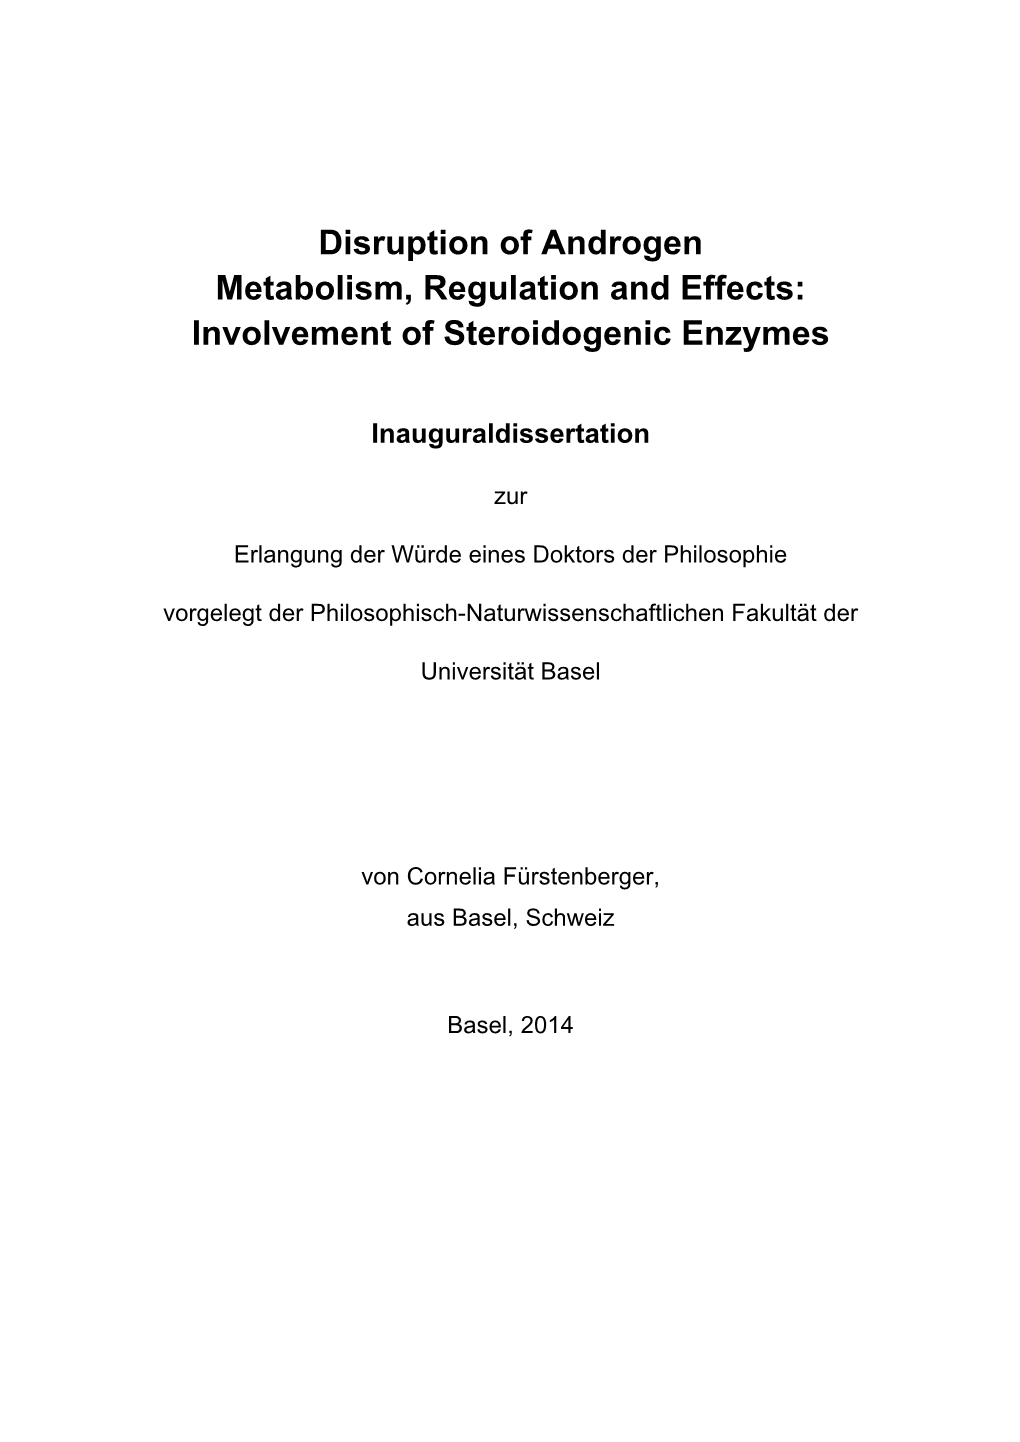 Disruption of Androgen Metabolism, Regulation and Effects: Involvement of Steroidogenic Enzymes